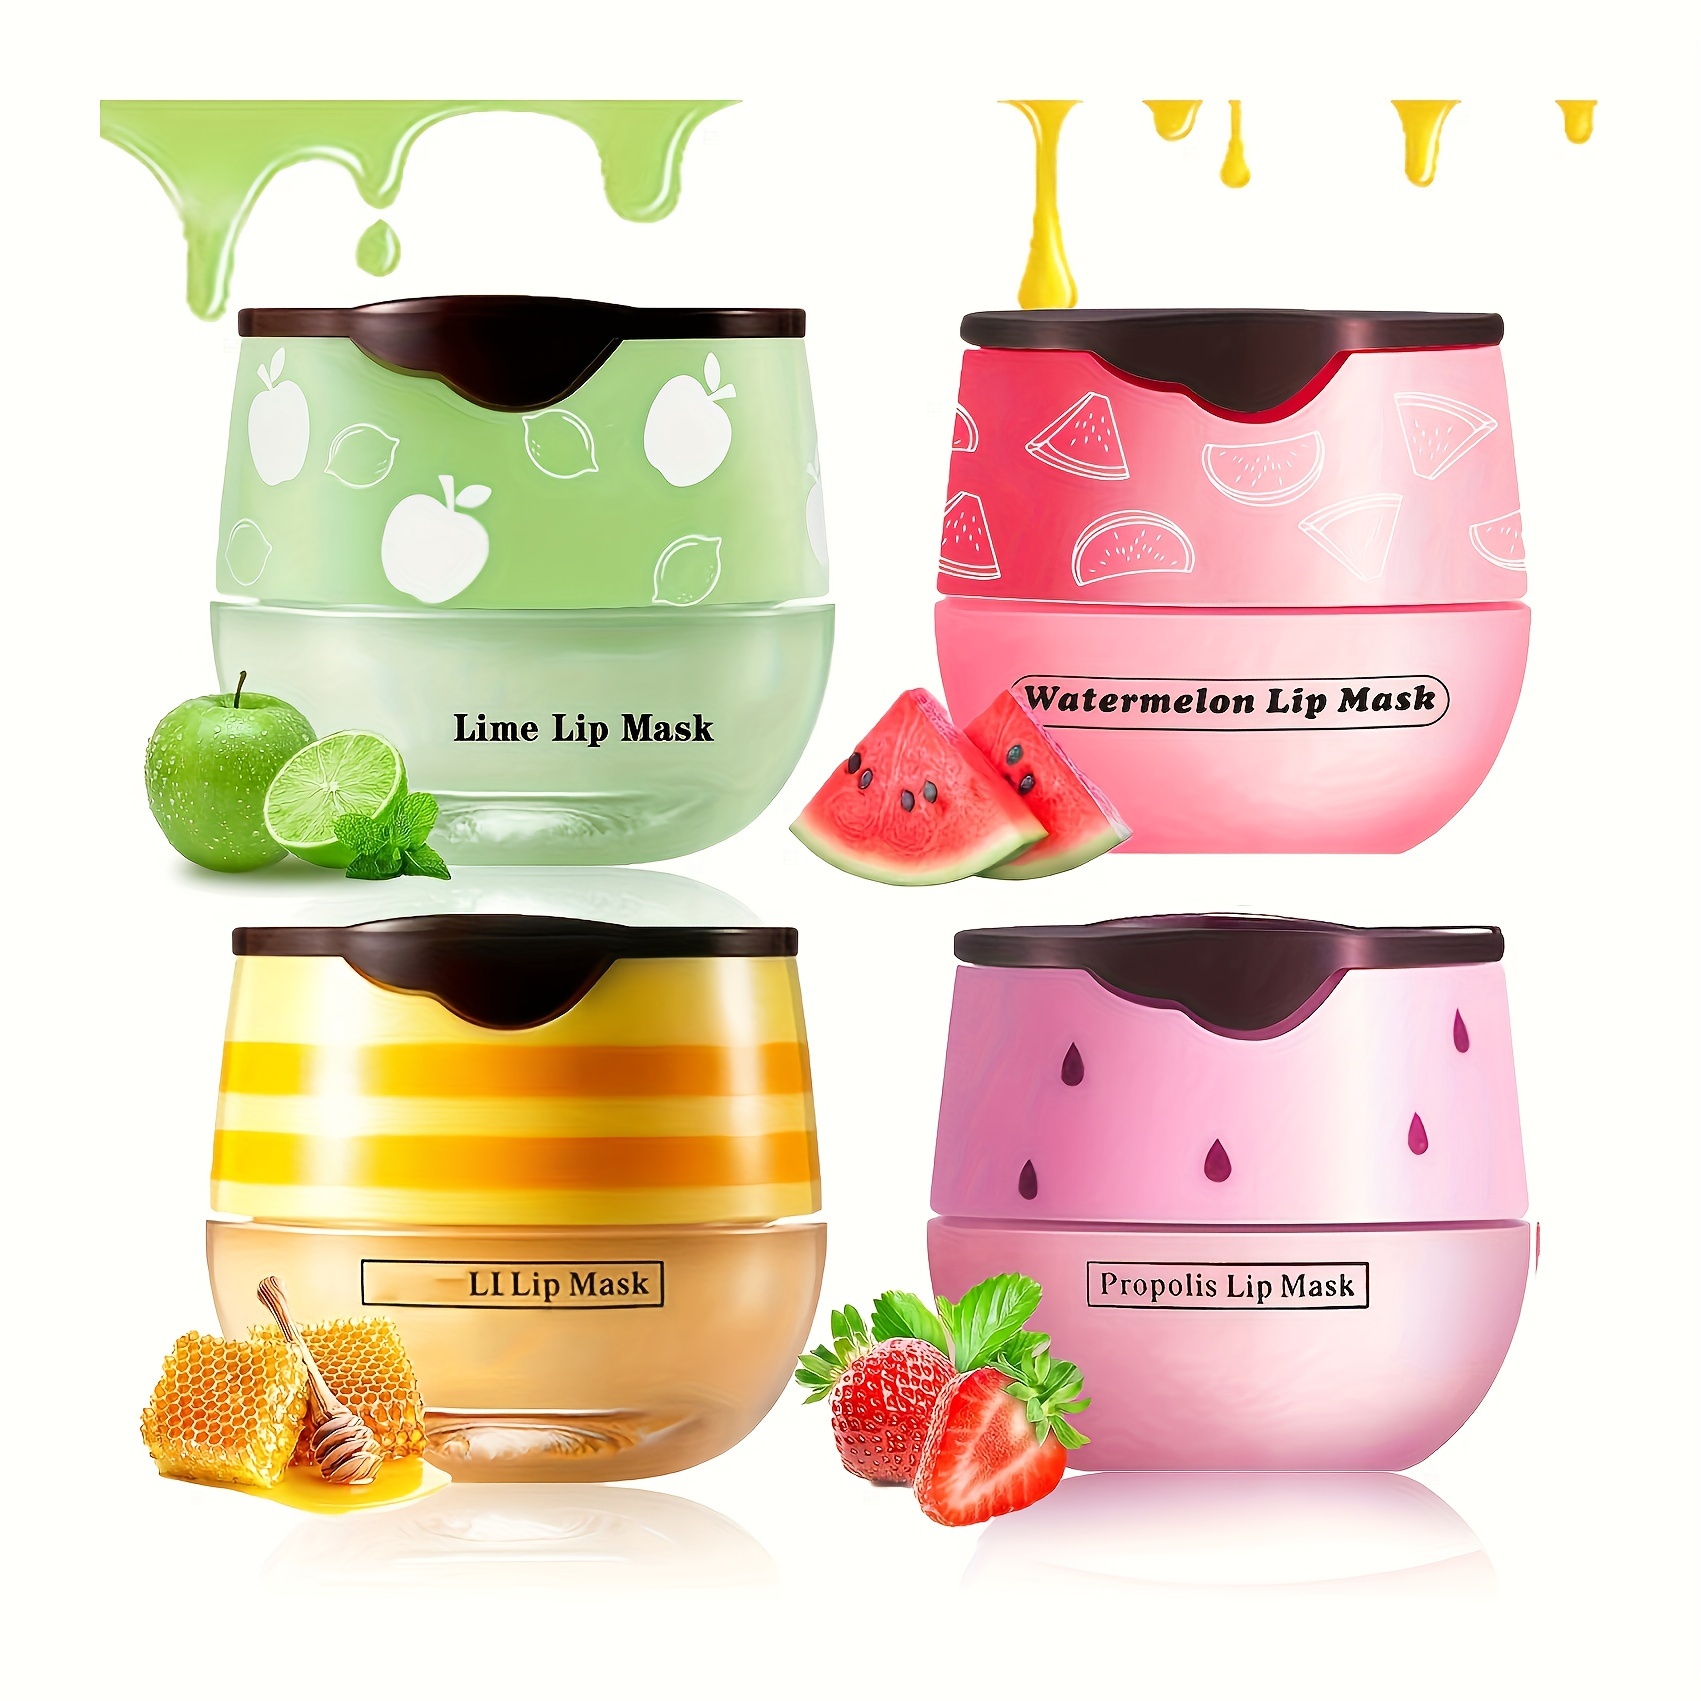 

Fruit Flavored Lip Mask Series - Strawberry, Honey, Watermelon, - Moisturizing & Soothing, Smooth Lip Lines, Non-greasy, Absorbs Easily, For Hydrated And Smooth Lips